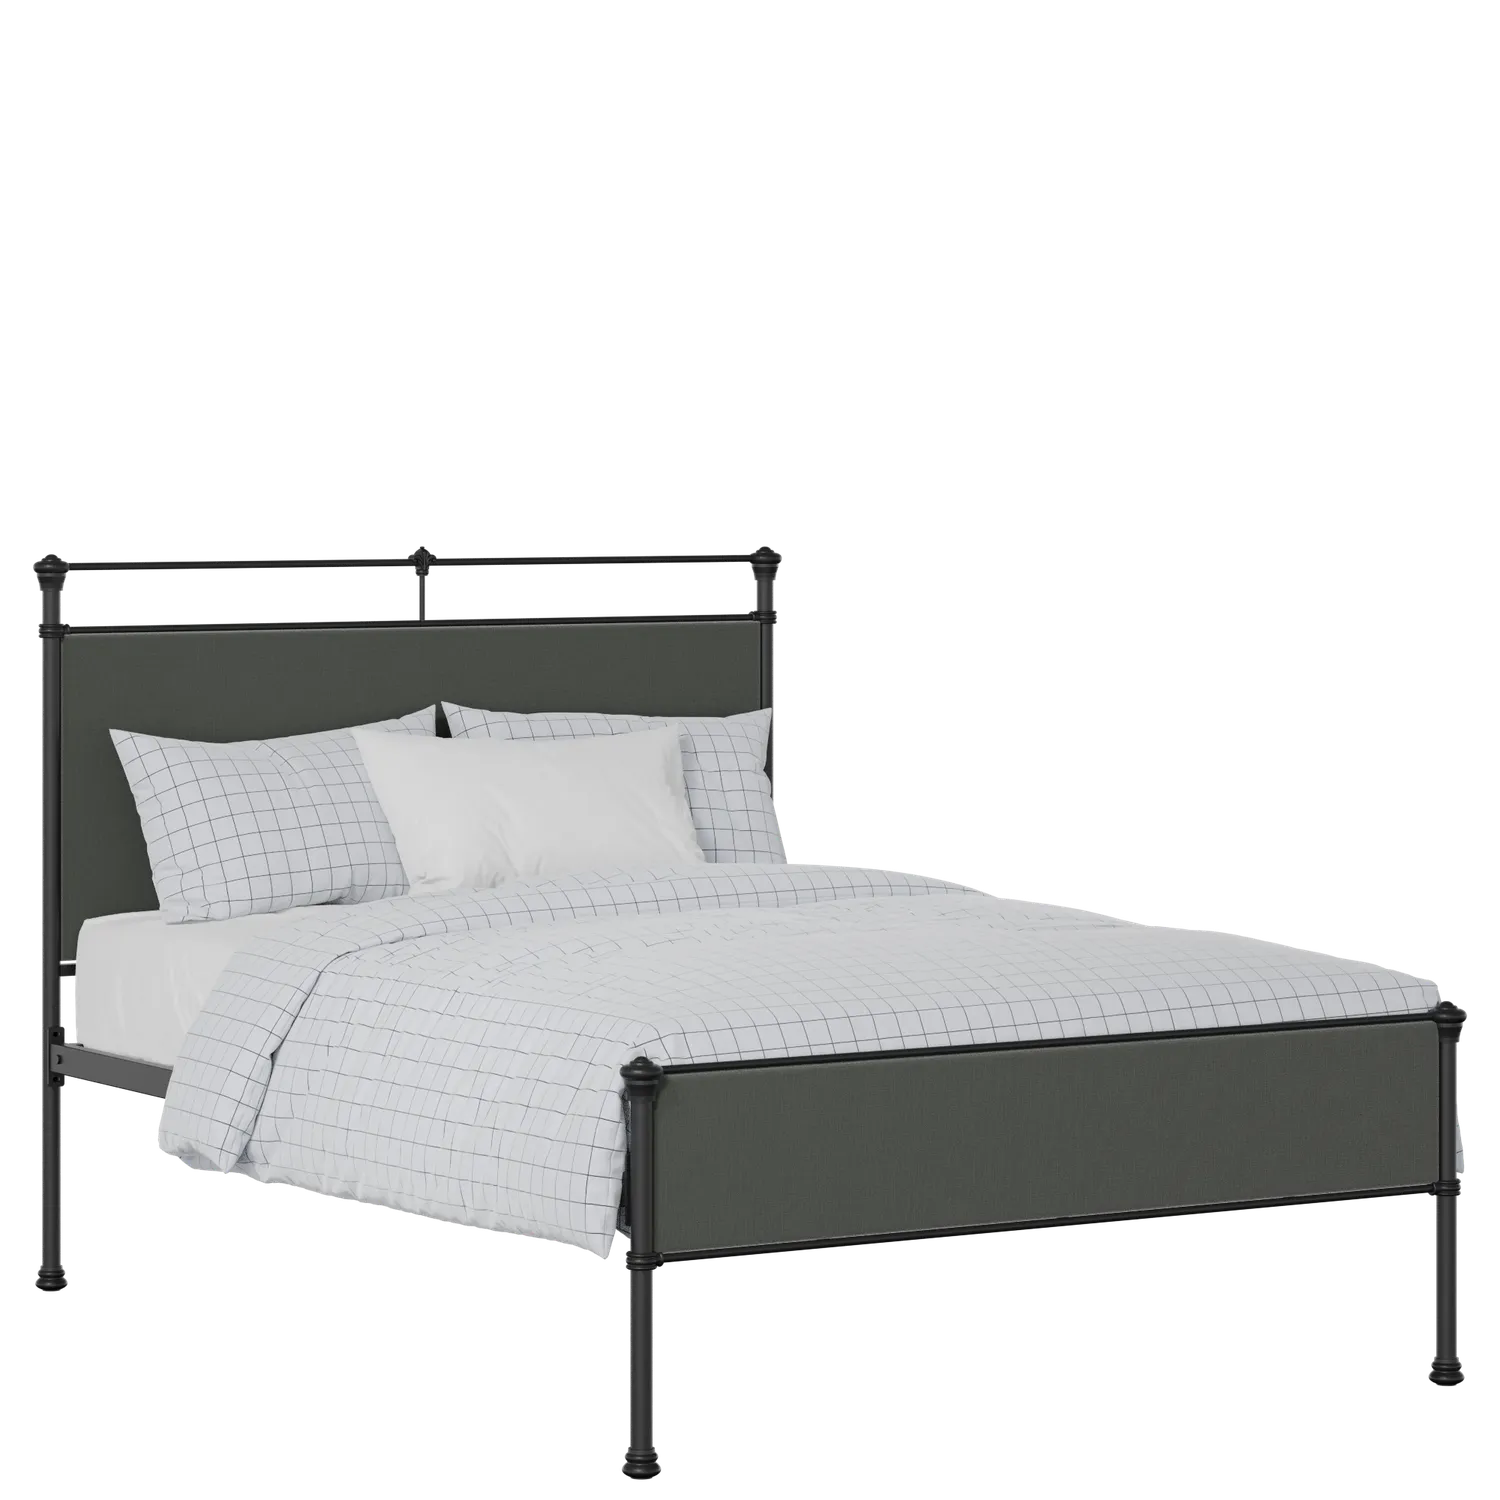 Nancy Slim iron/metal upholstered bed in black with iron fabric